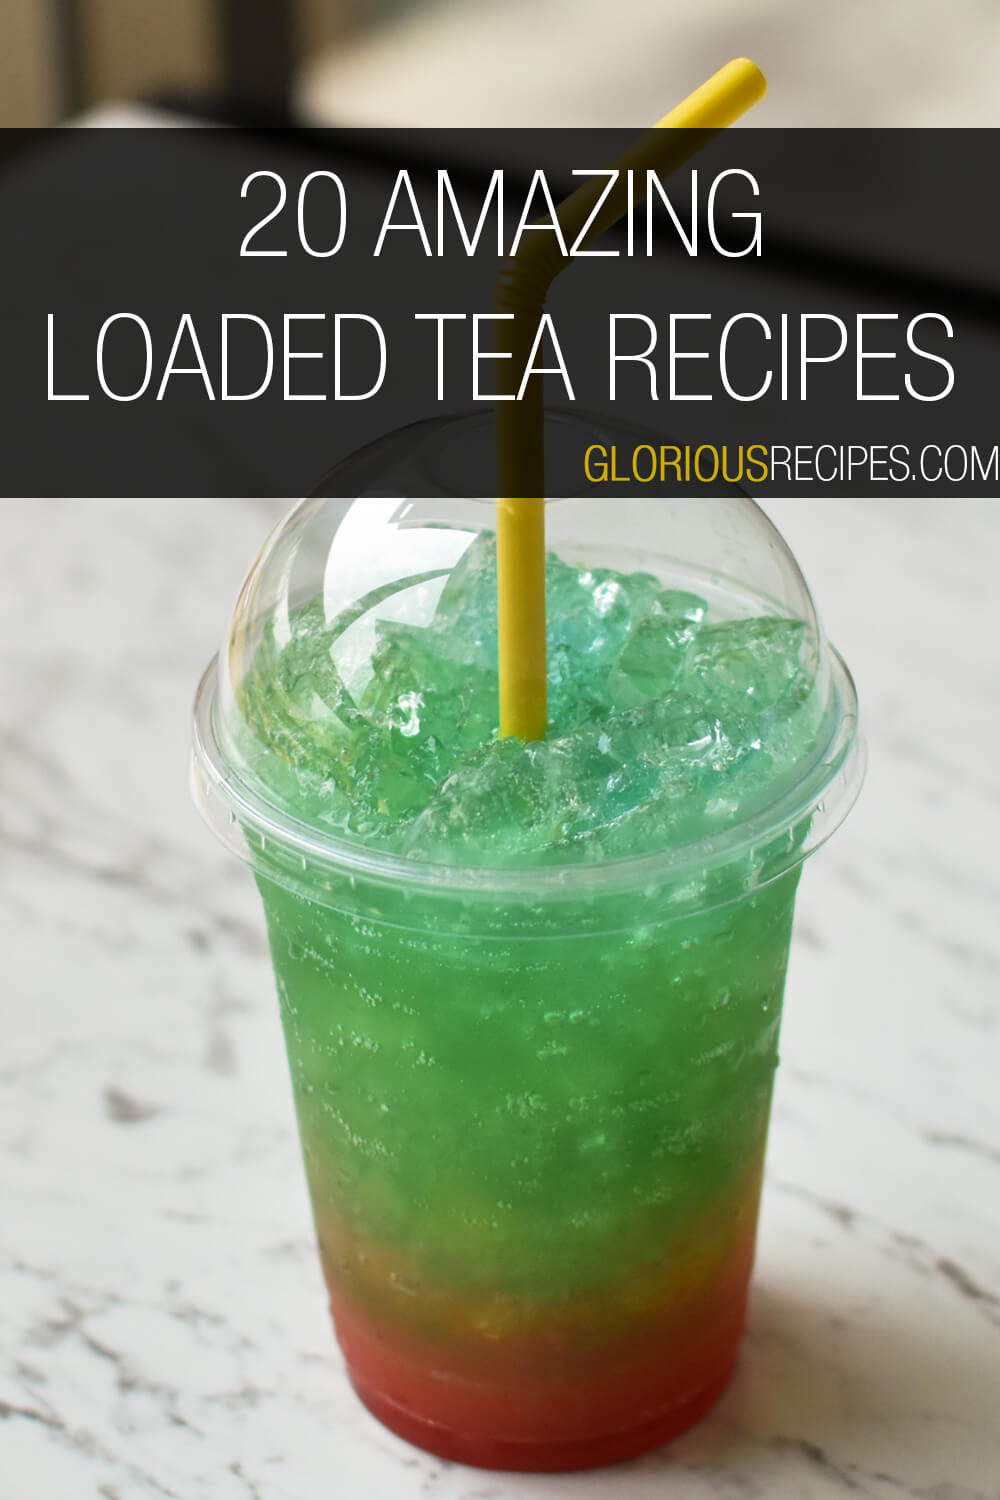 20 Amazing Loaded Tea Recipes To Try At Home